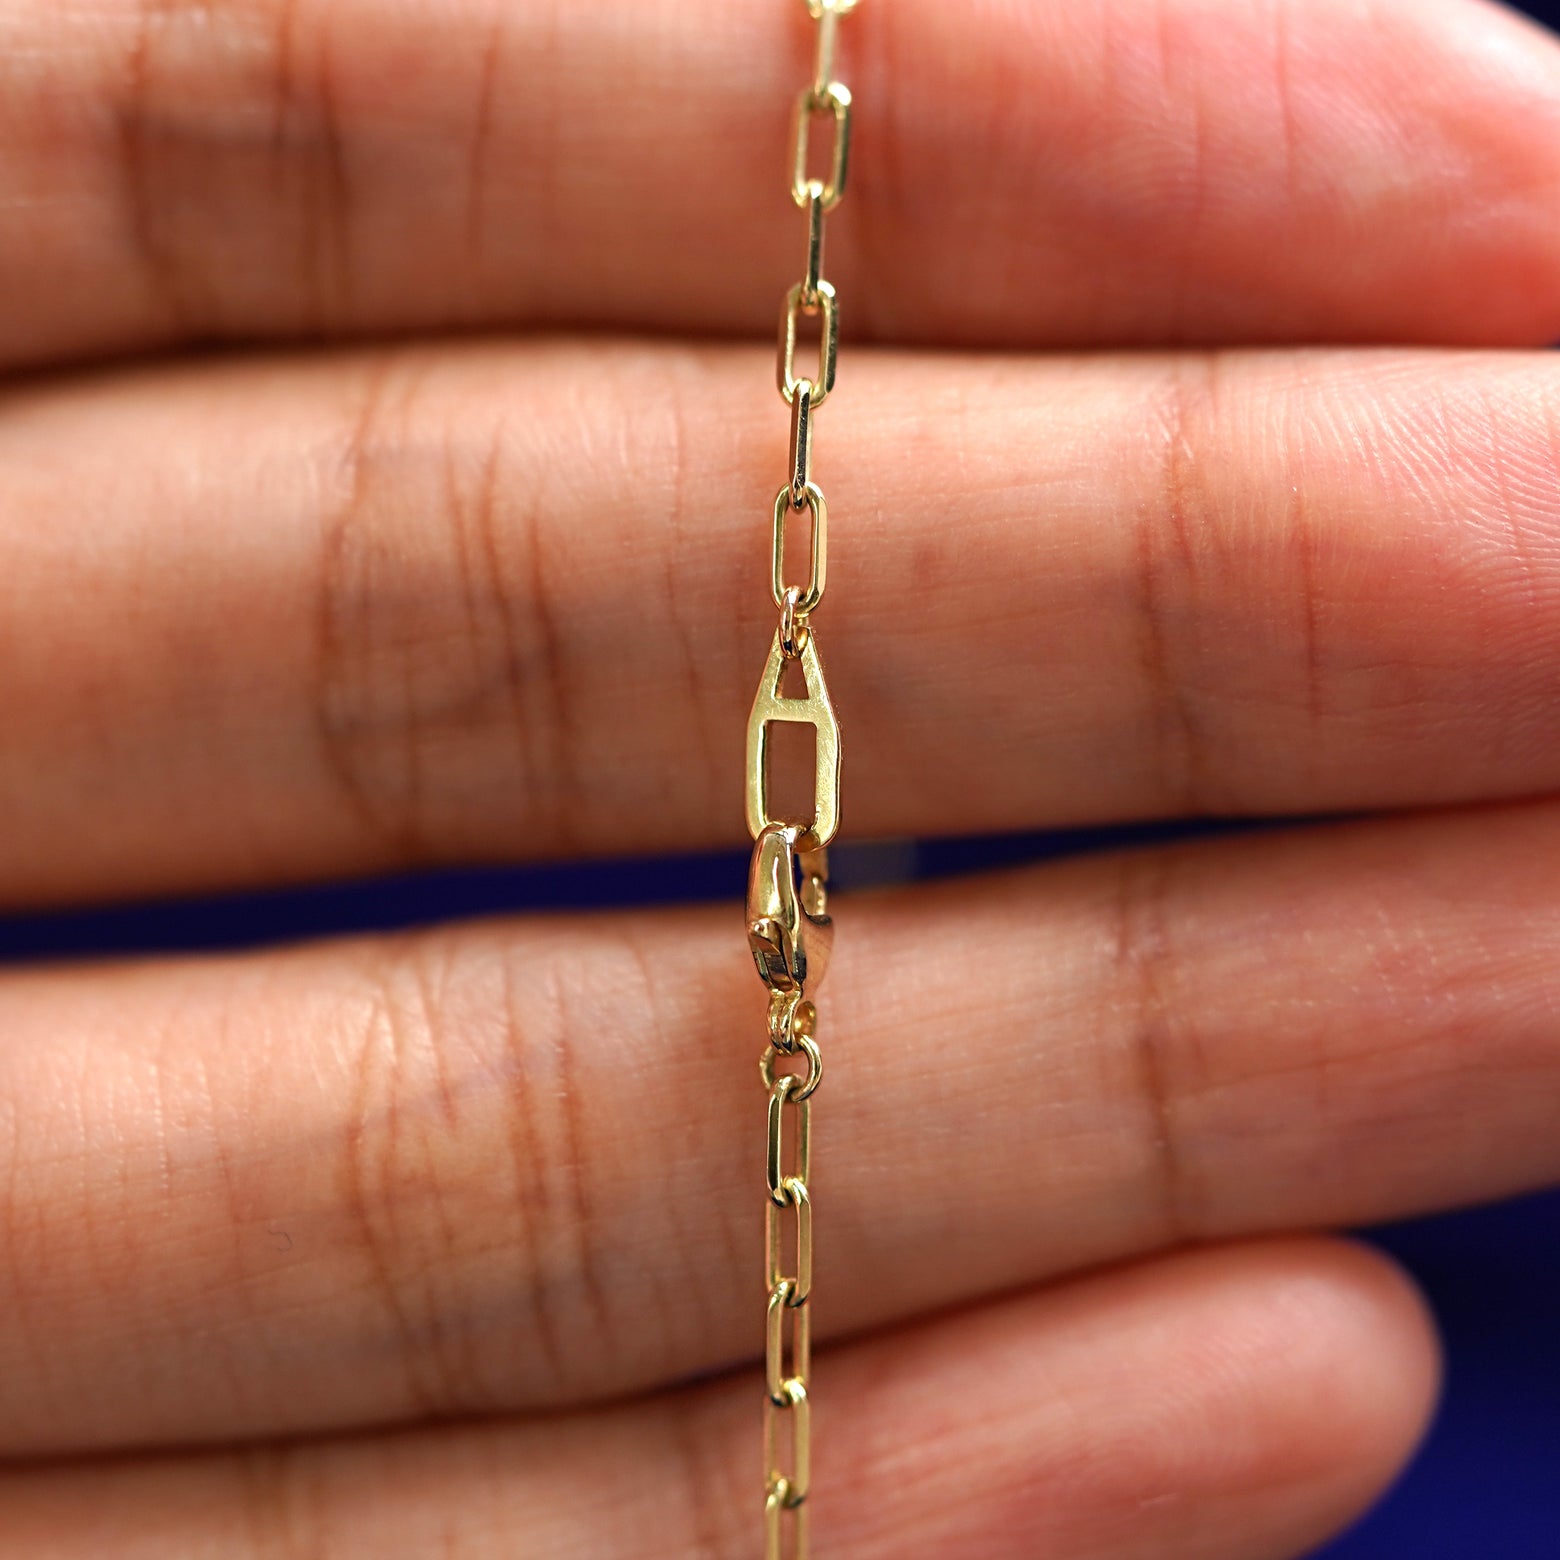 An Automic Gold AU lobster claw clasp on a Butch Chain